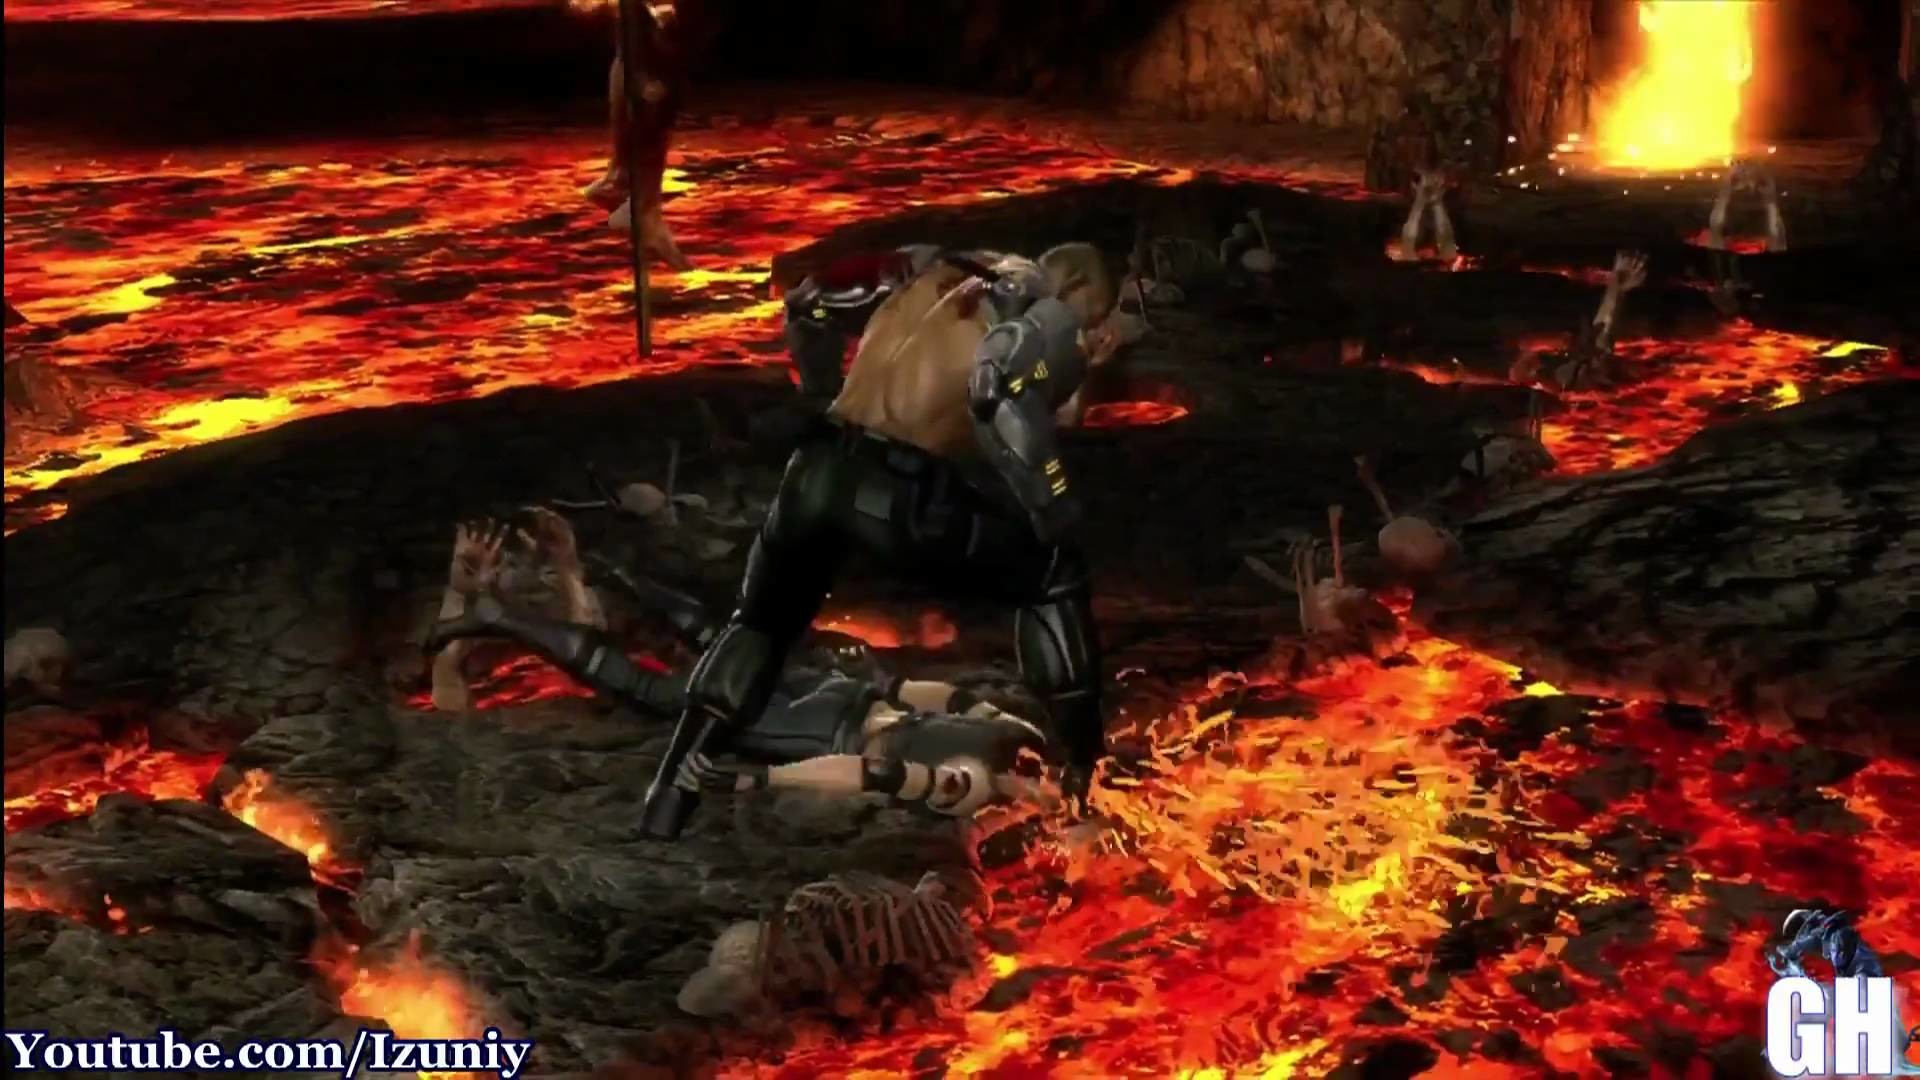 1920x1080 Mortal Kombat 9 Scorpion's Lair / Hell Fatality "Stage Fatality" - YouTube